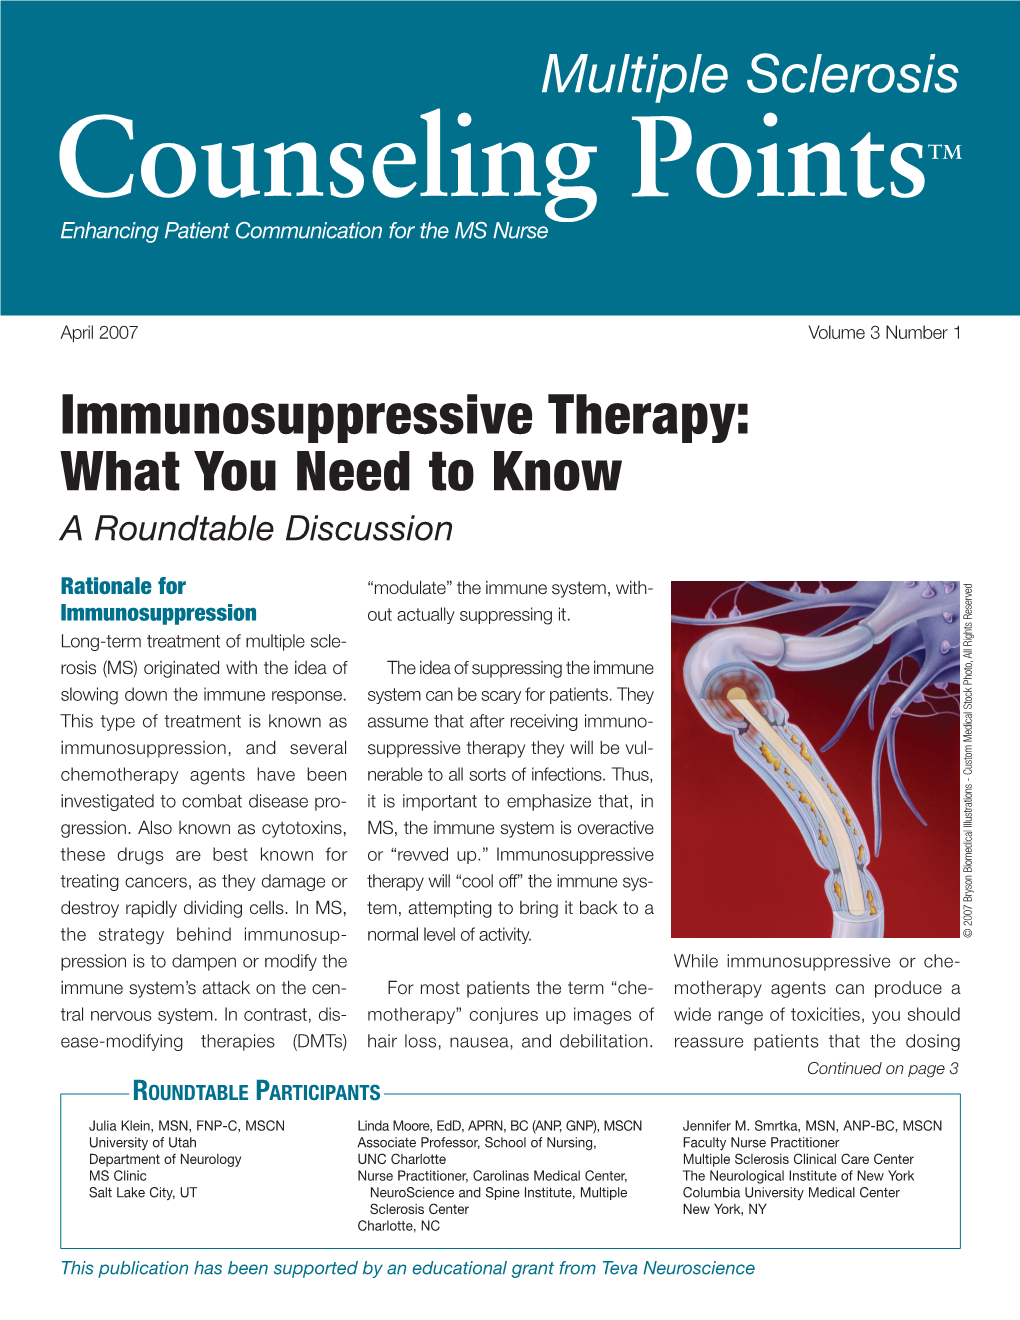 Immunosuppressive Therapy: What You Need to Know a Roundtable Discussion D E